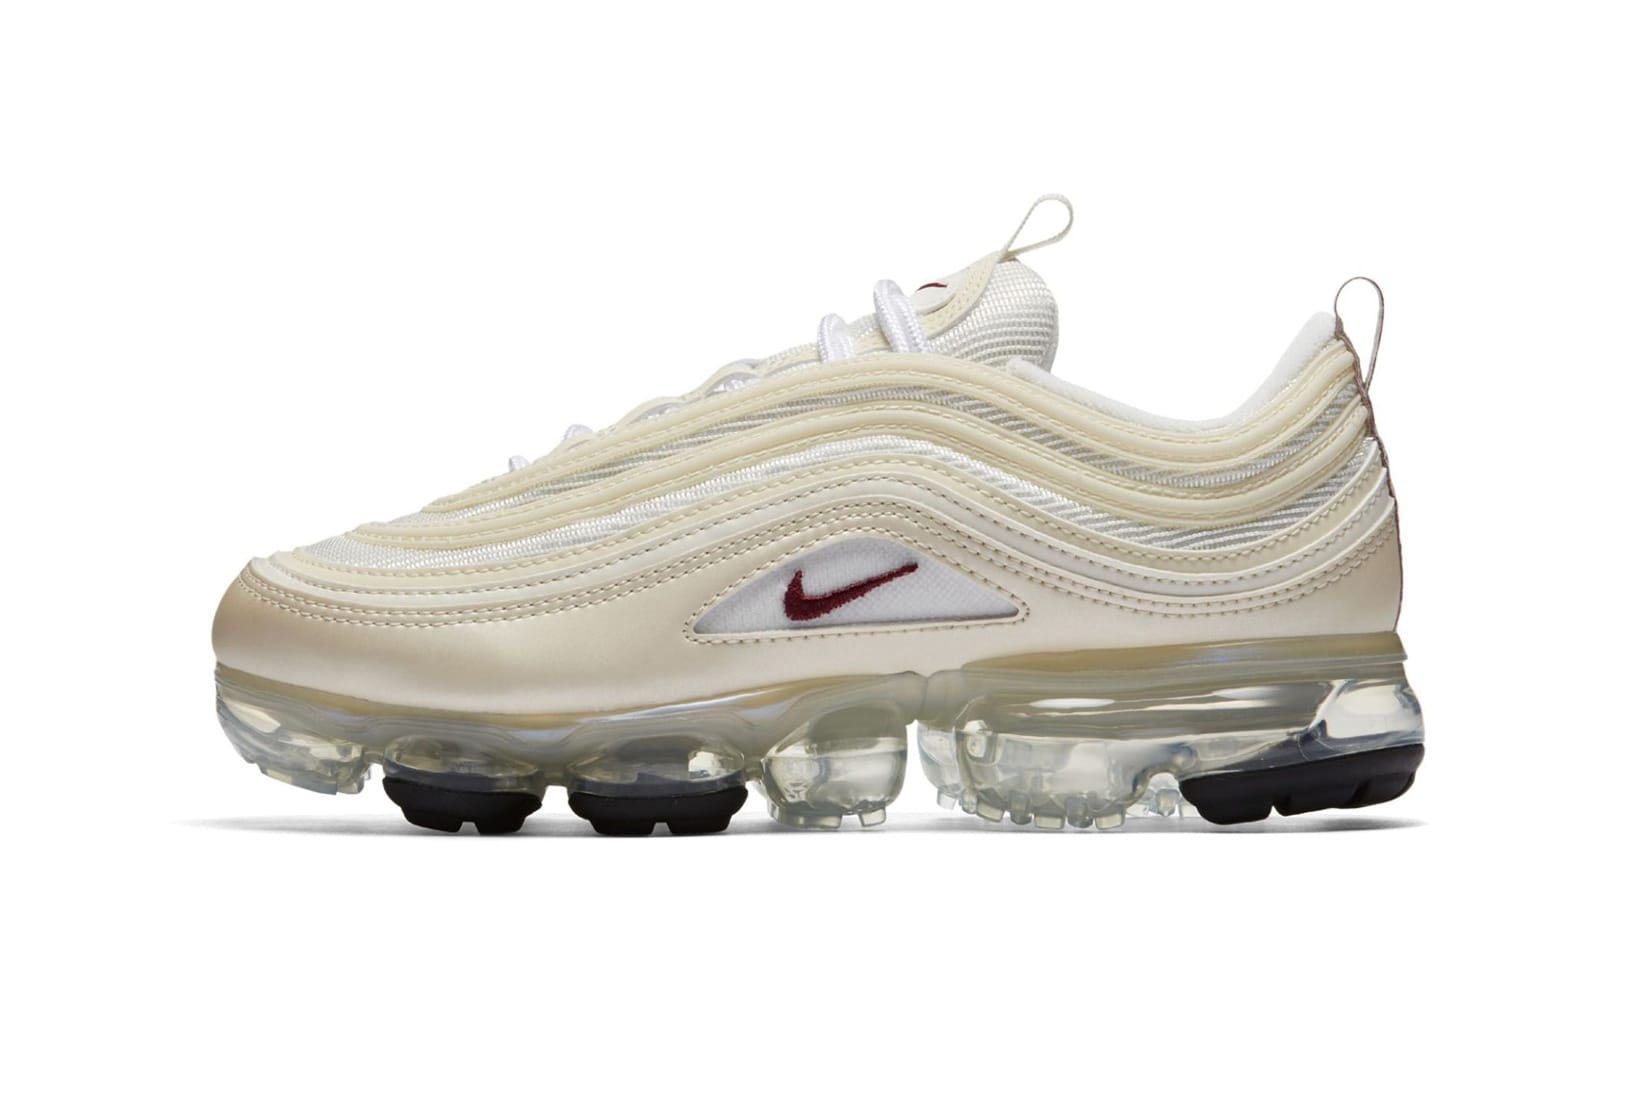 Nike Air Max 97 Updated With VaporMax 